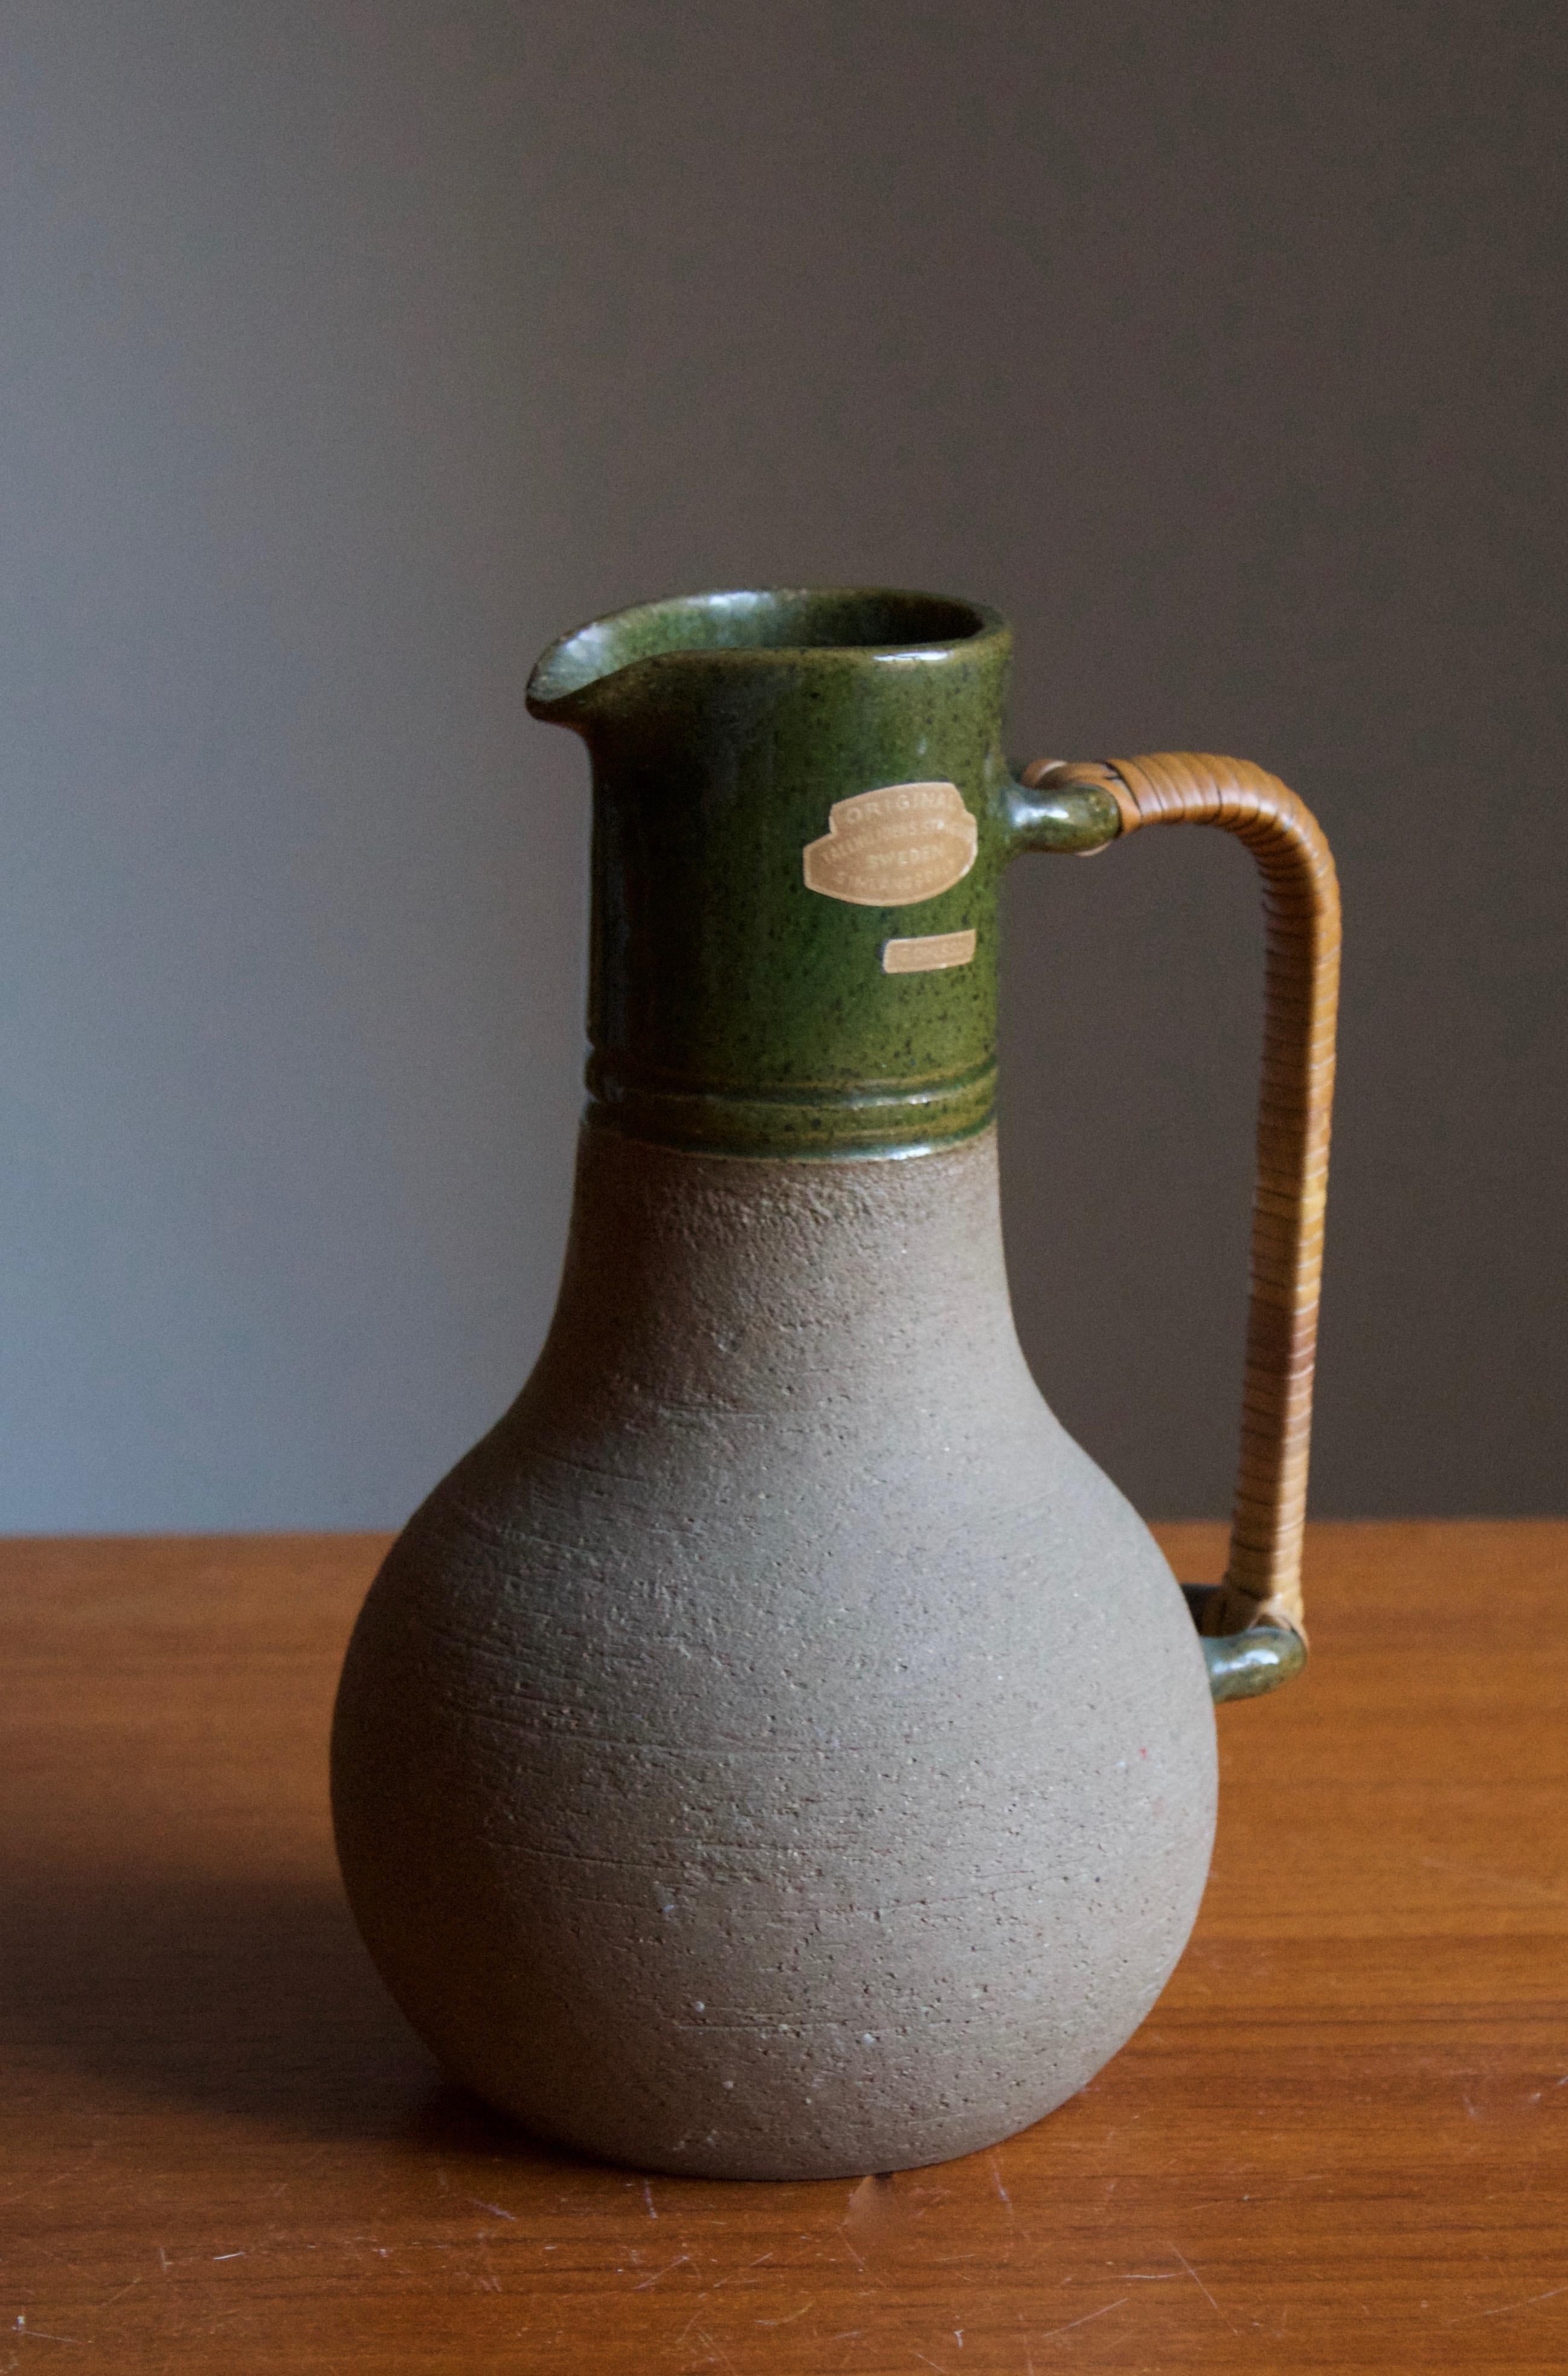 A modernist pitcher, designed by Sture G. Ohlsson, produced by his own workshop 